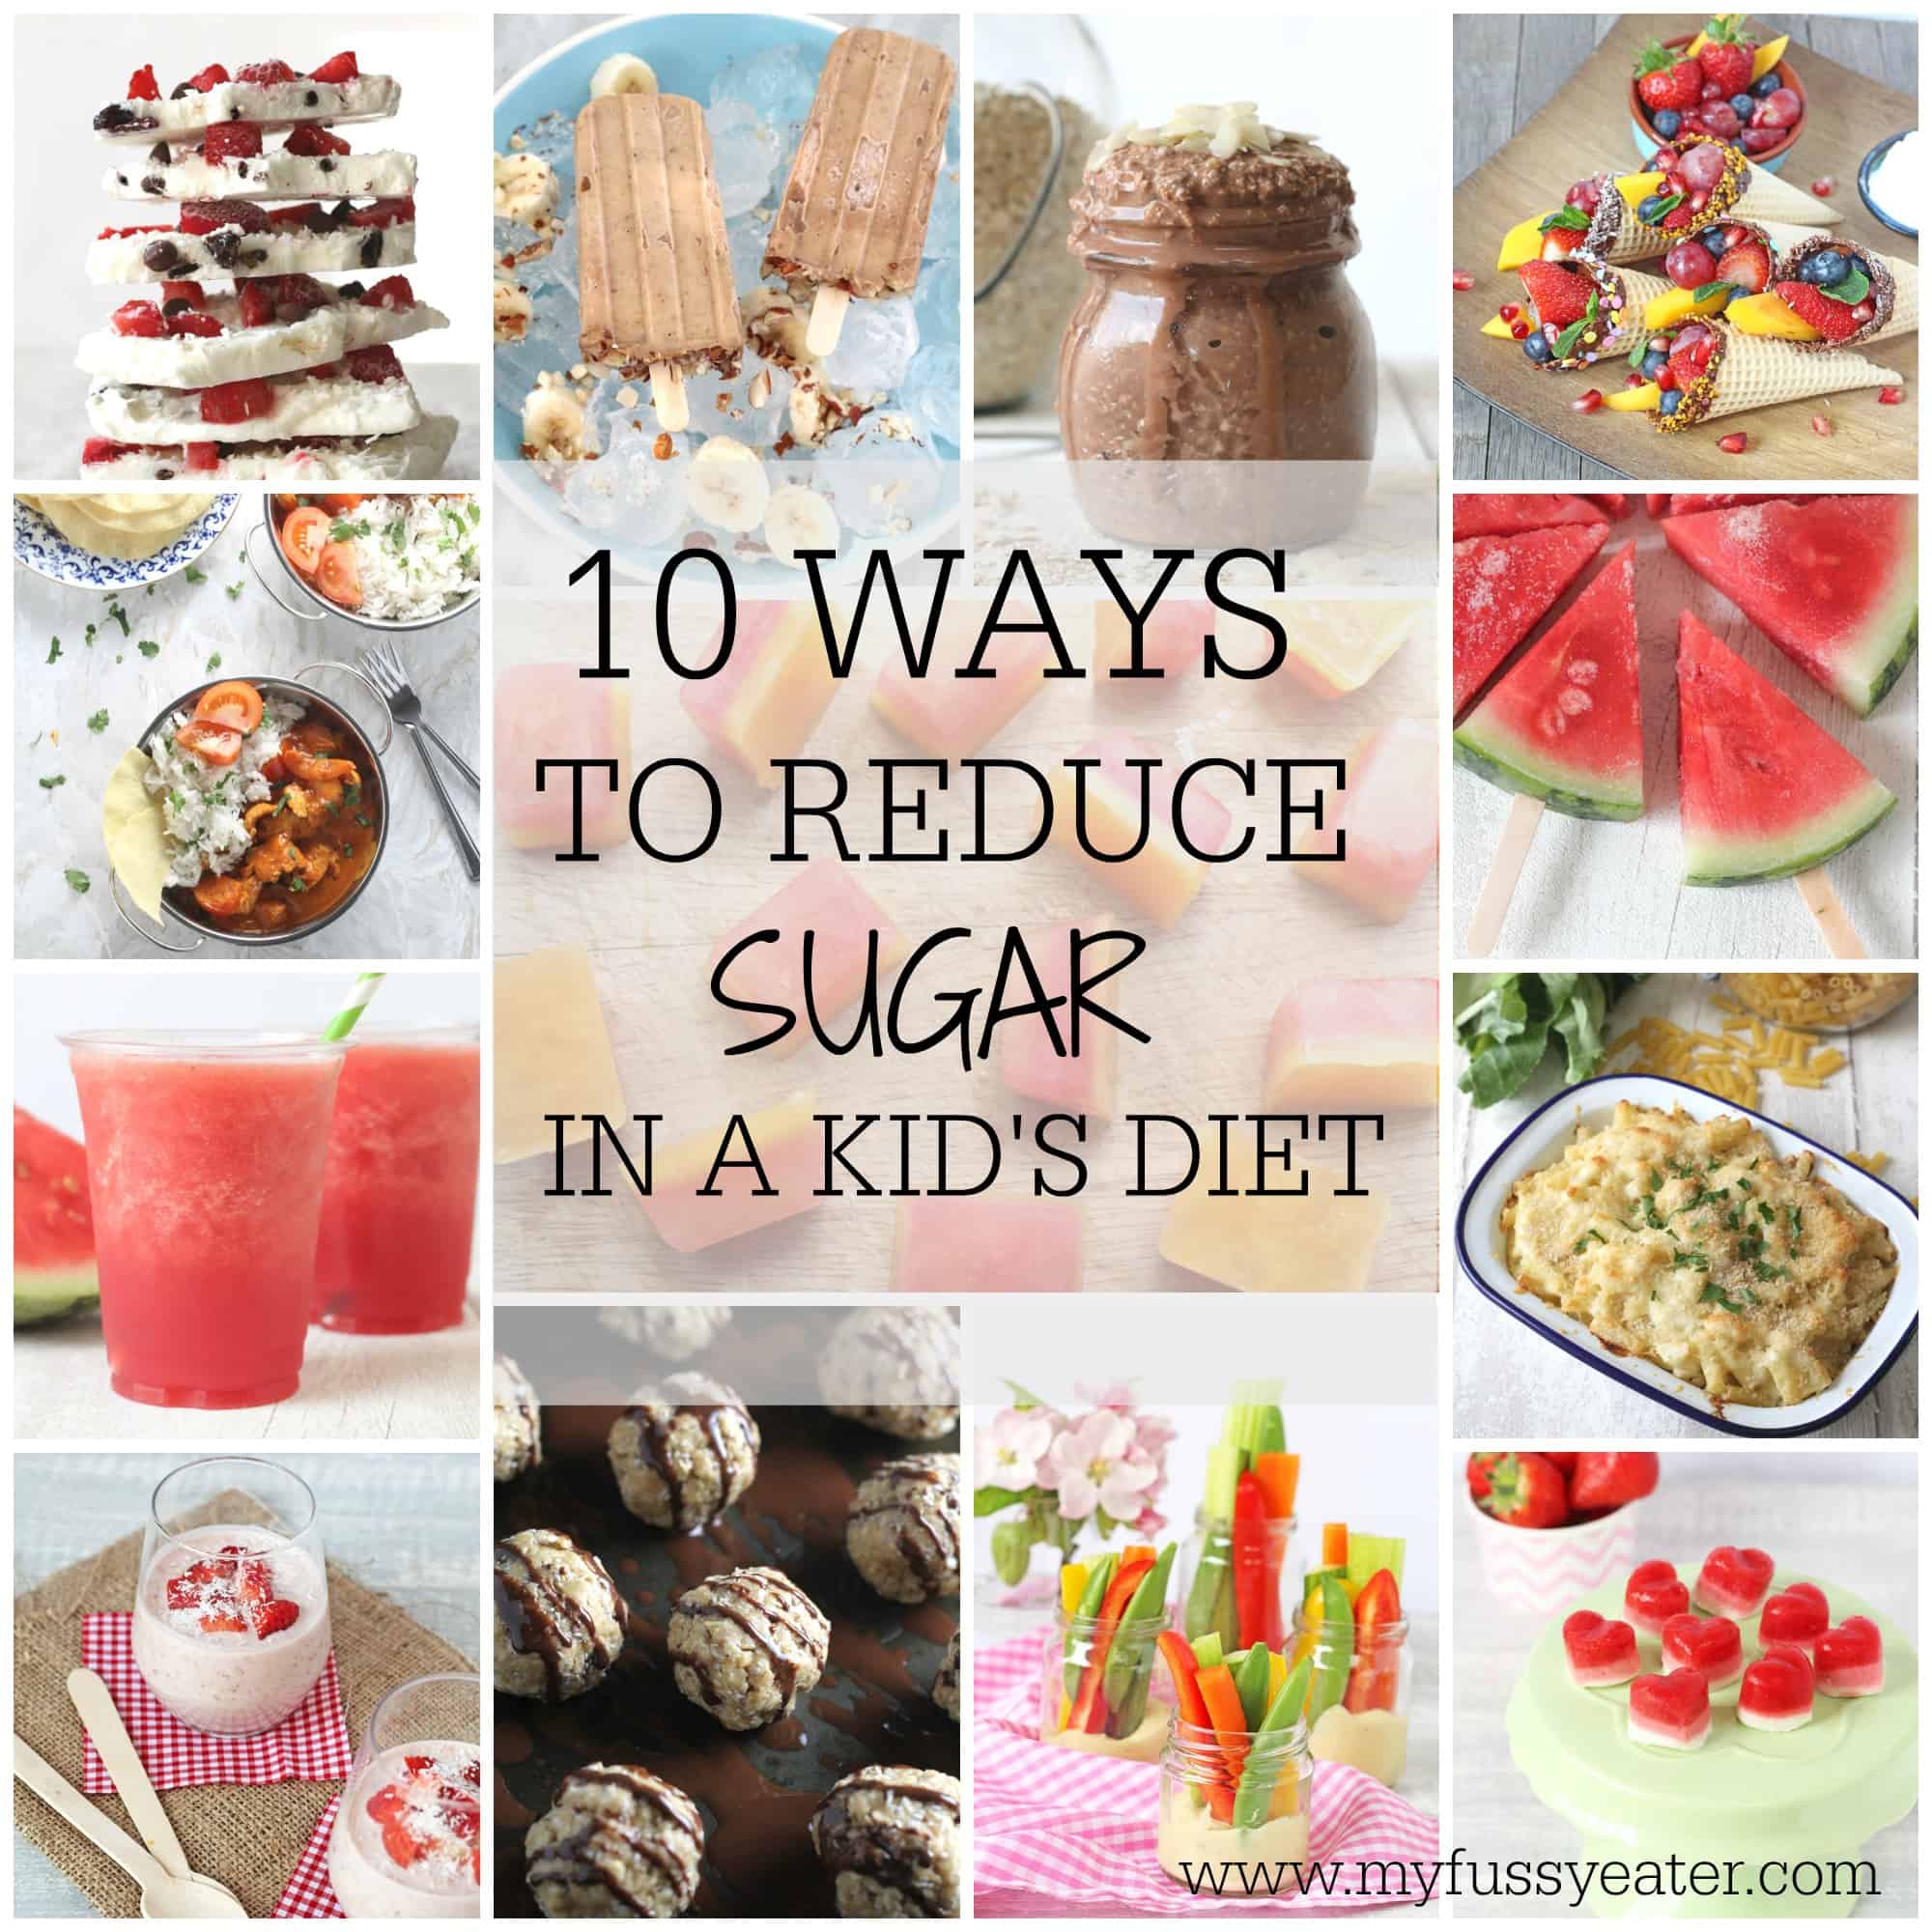 Ten easy ways you can reduce sugar in your children's' diet. Try these simple food swaps | My Fussy Eater Blog